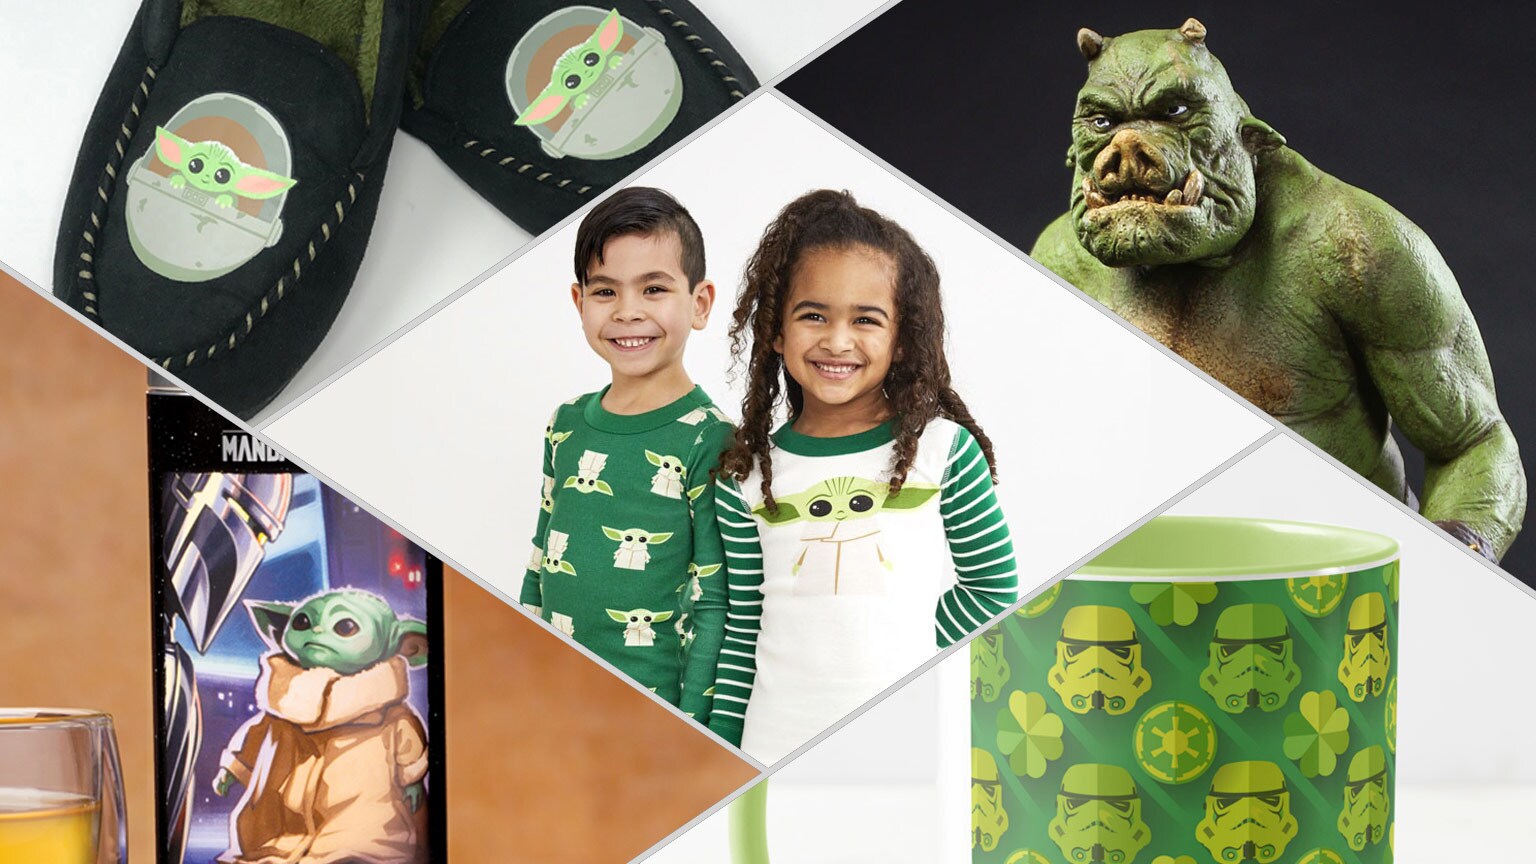 Celebrate St. Patrick’s Day and Beyond with the Star Wars Green Gift Guide